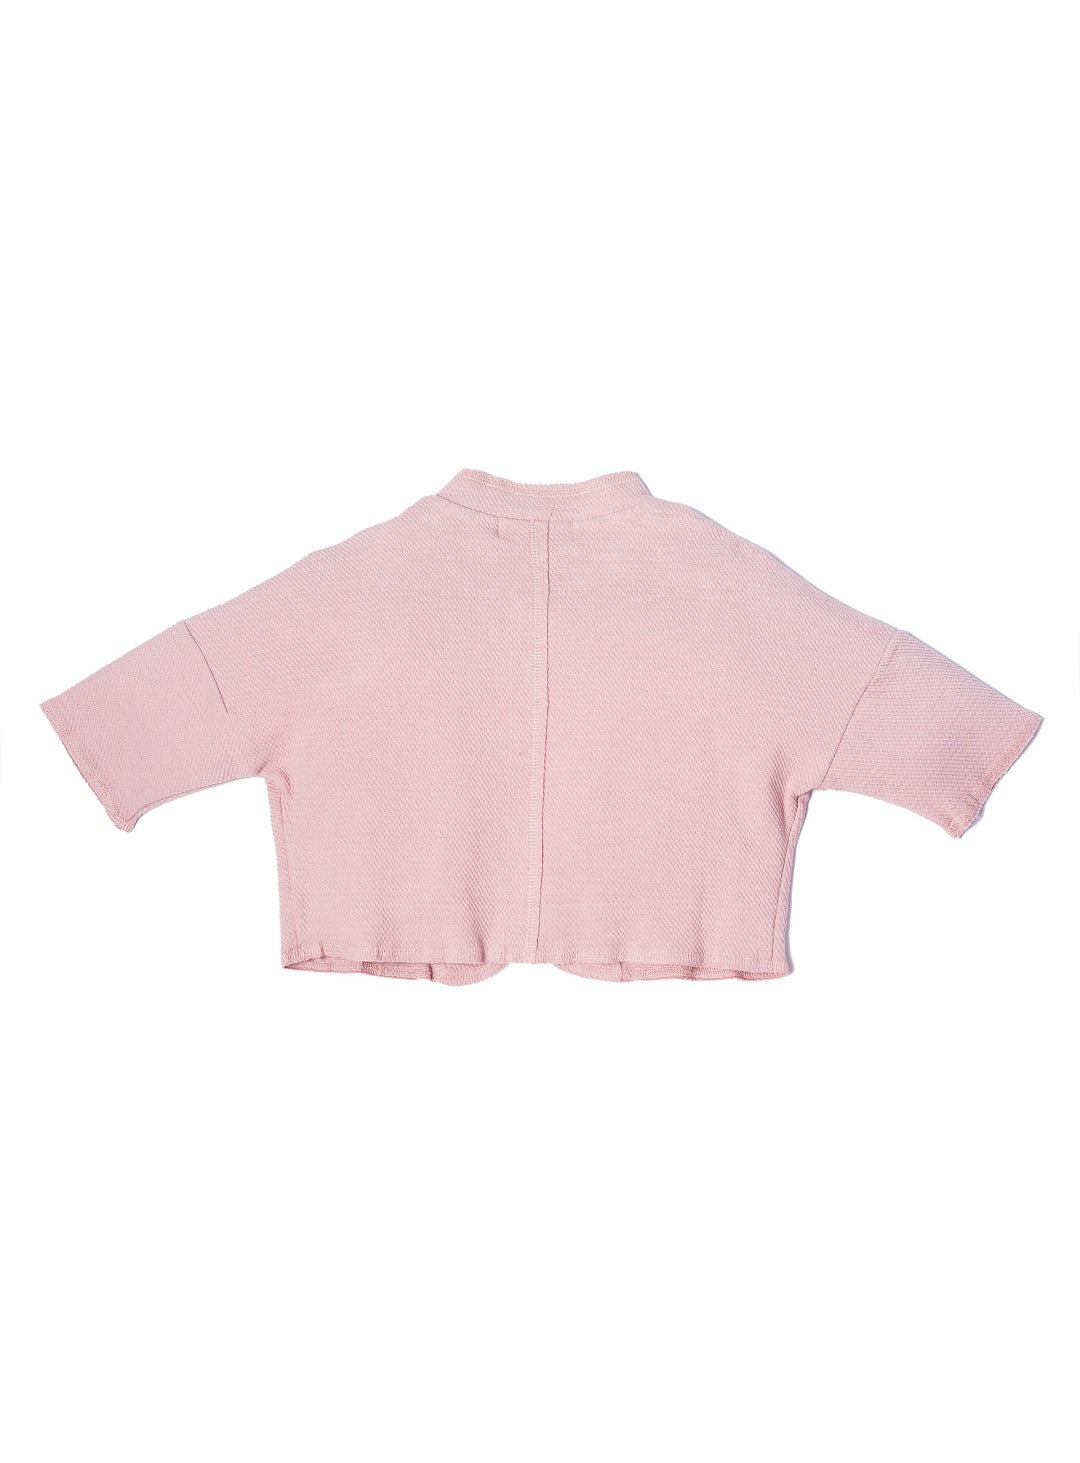 rose pink cardigan with black buttons